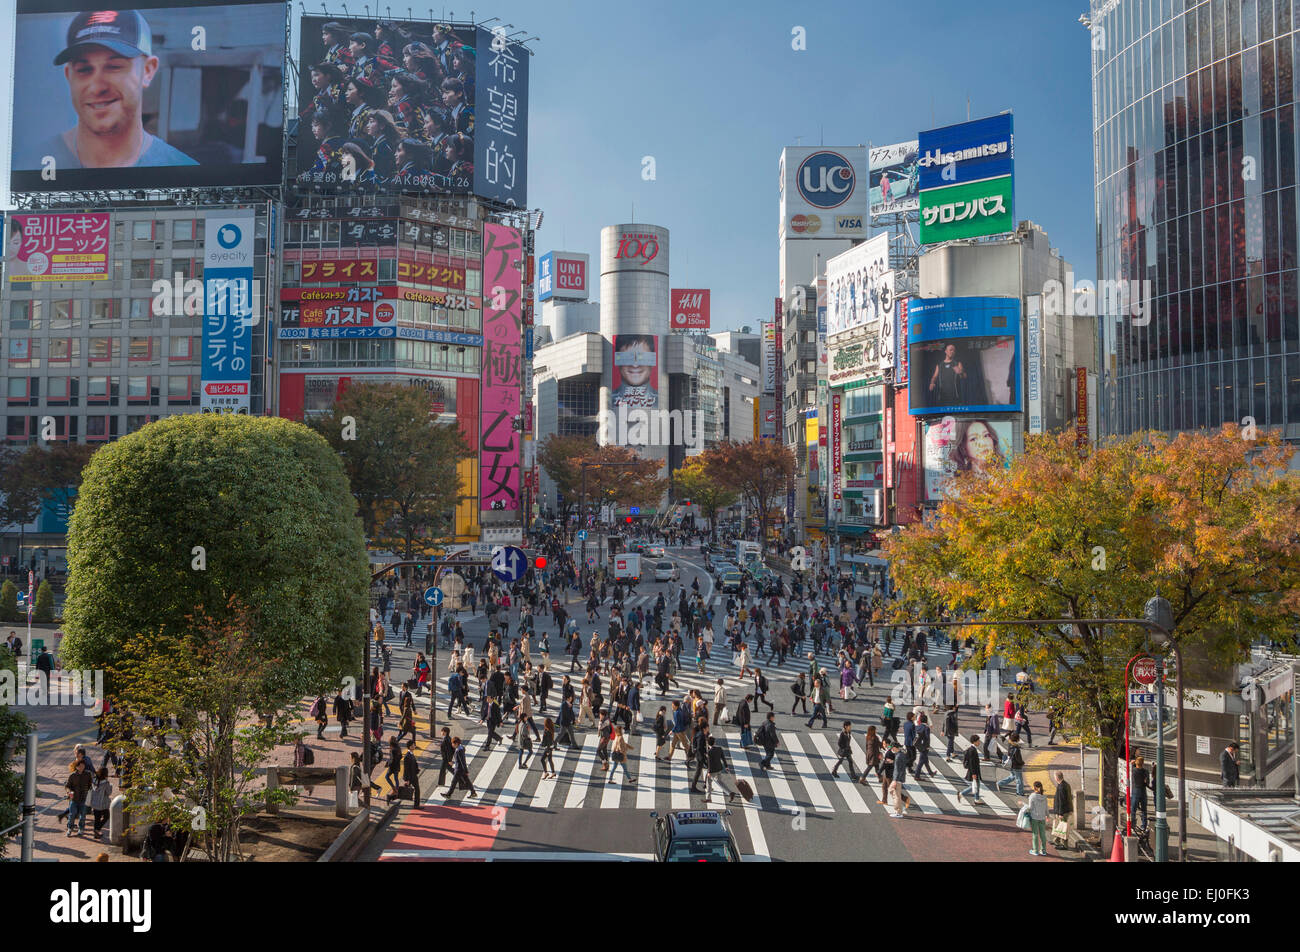 Center, City, Hachiko, Japan, Asia, Tokyo, architecture, autumn, colourful, commercials, advertising, crossing, fall, famous, ped Stock Photo